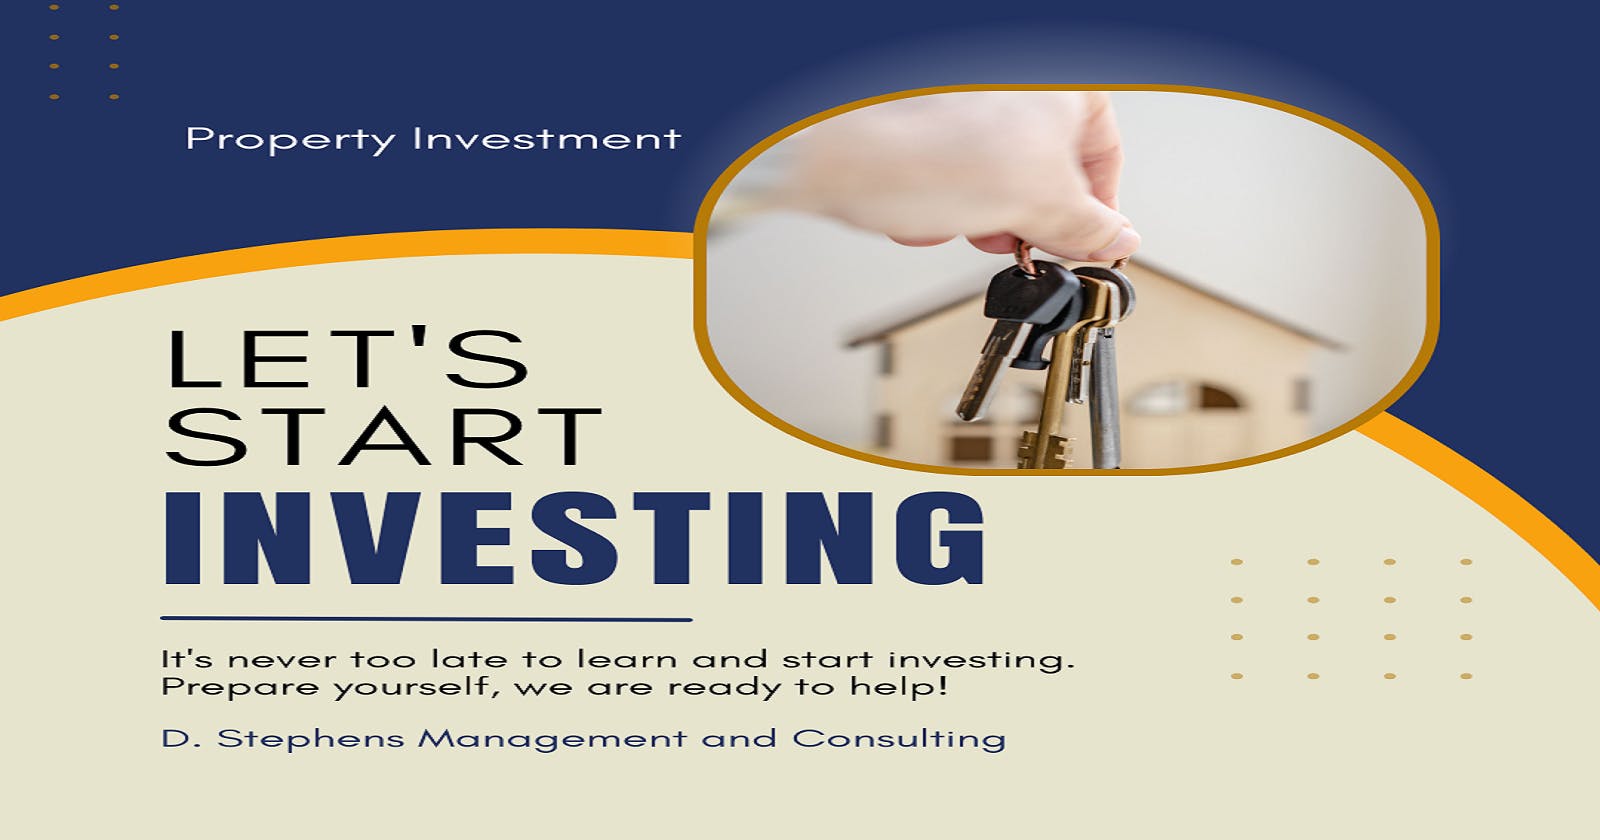 D. Stephens Management and Consulting | Real Estate Investment Understanding Market Trends